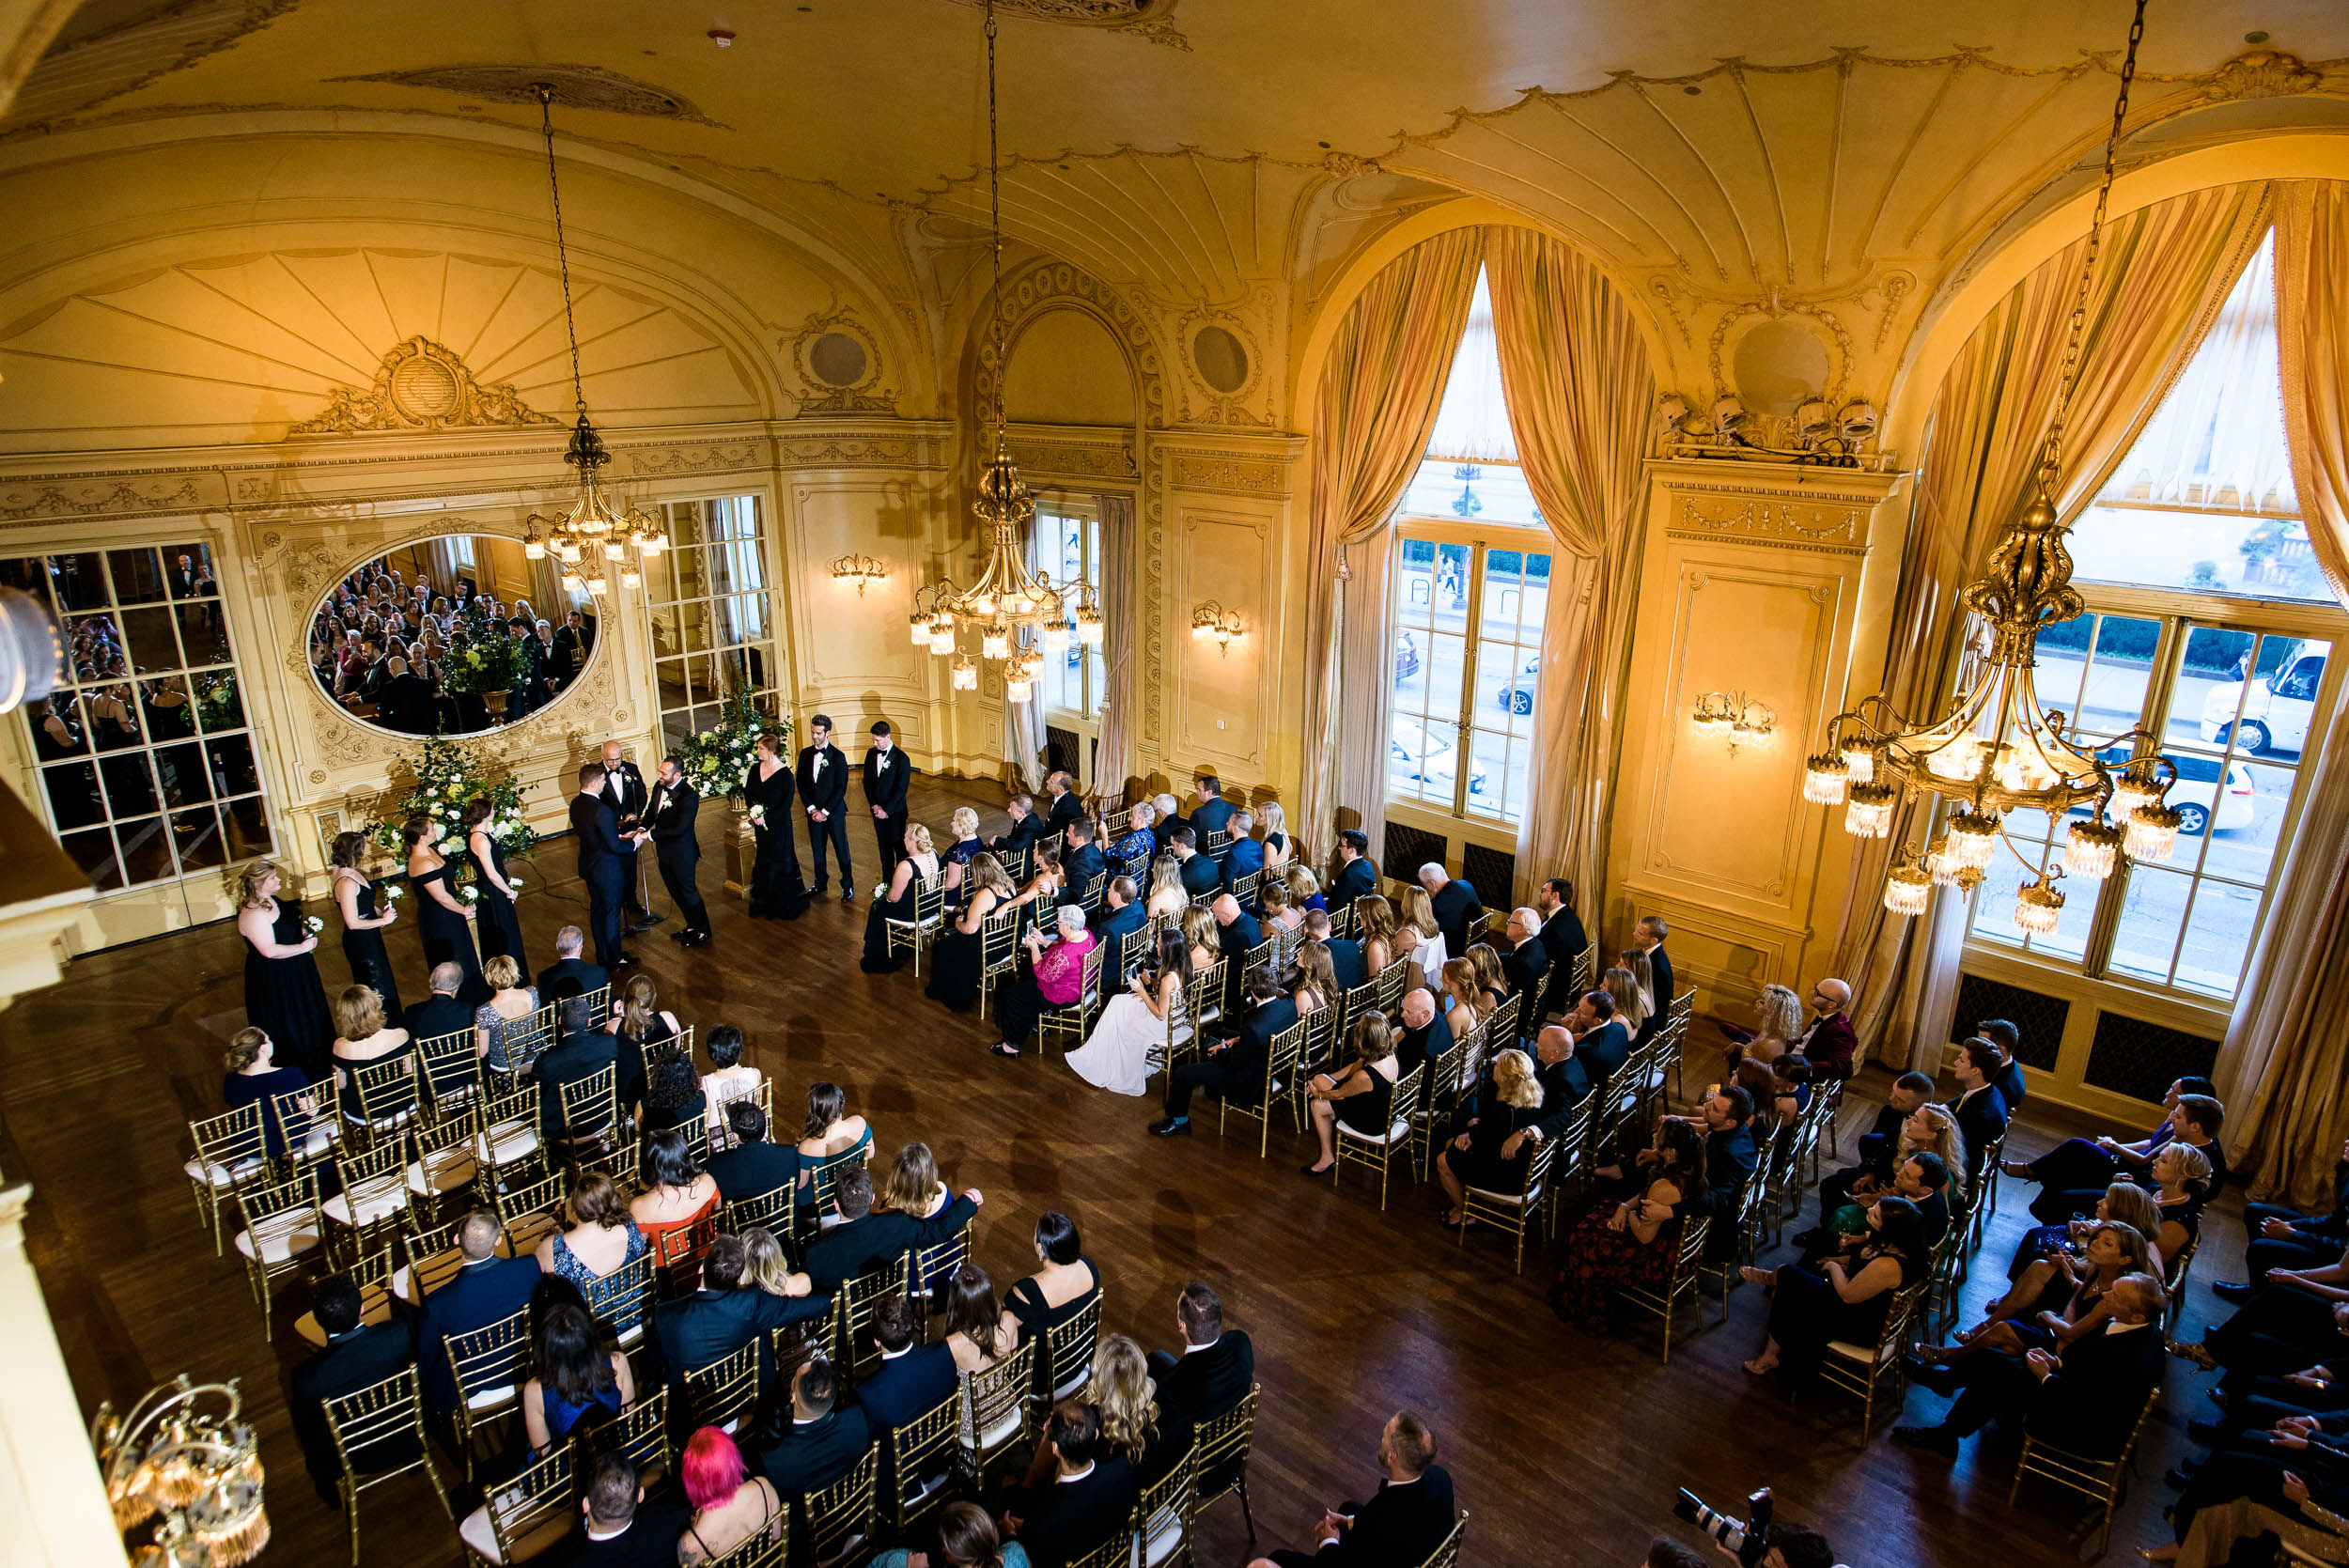 Romantic wedding ceremony for luxurious fall wedding at the Chicago Symphony Center captured by J. Brown Photography. See more wedding ideas at jbrownphotography.com!